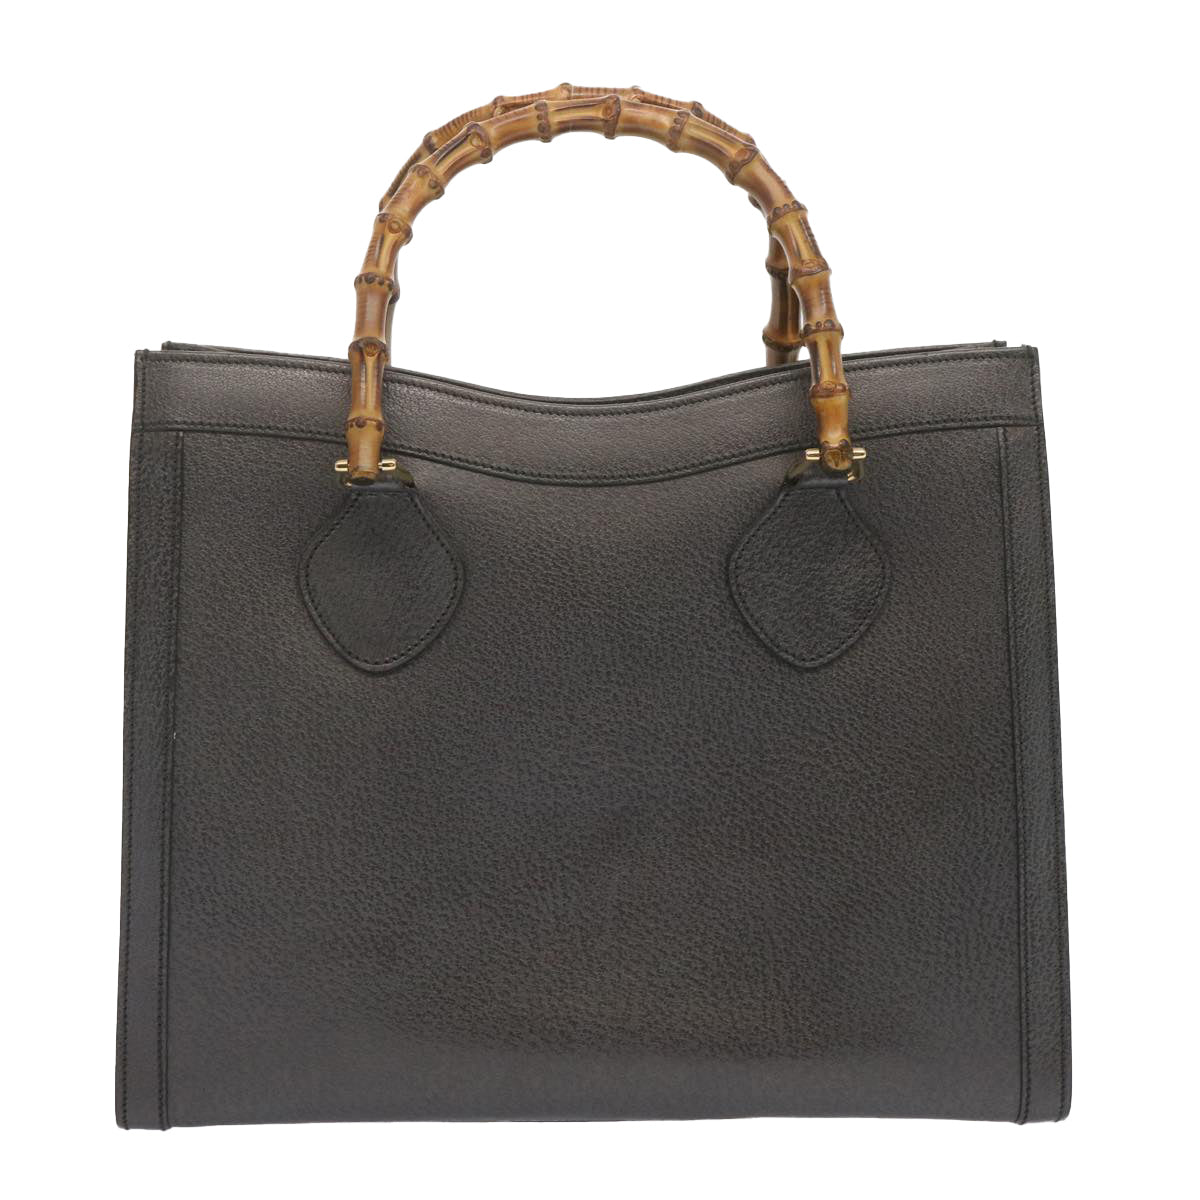 GUCCI Bamboo Tote Bag Leather Gray Auth ep3668 - 0